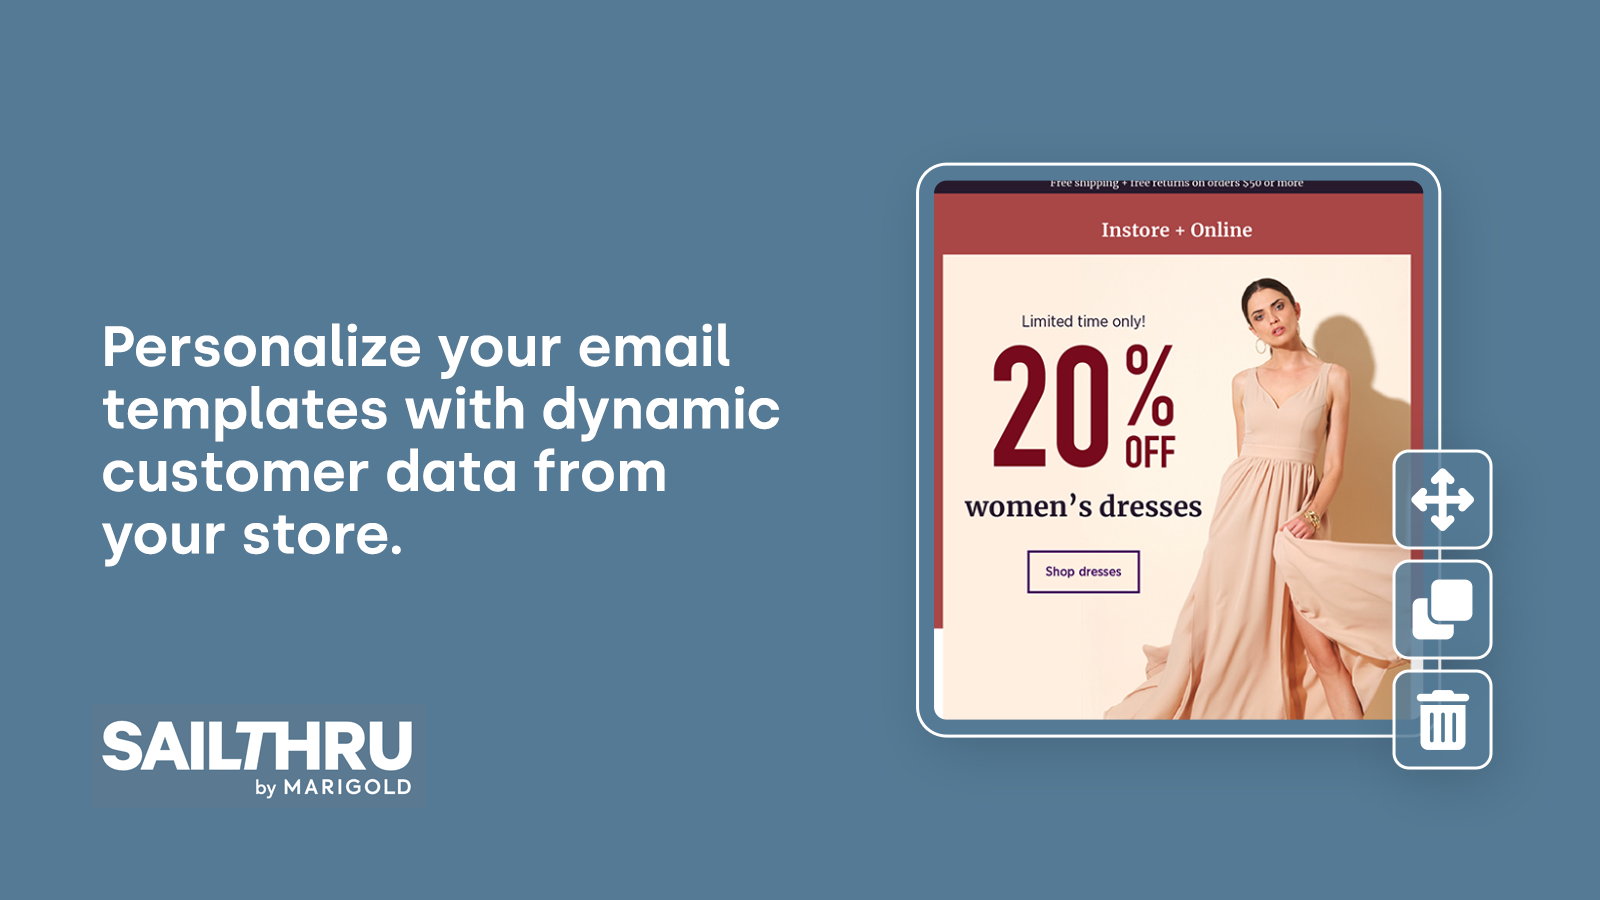 Create personalized emails using customer data.